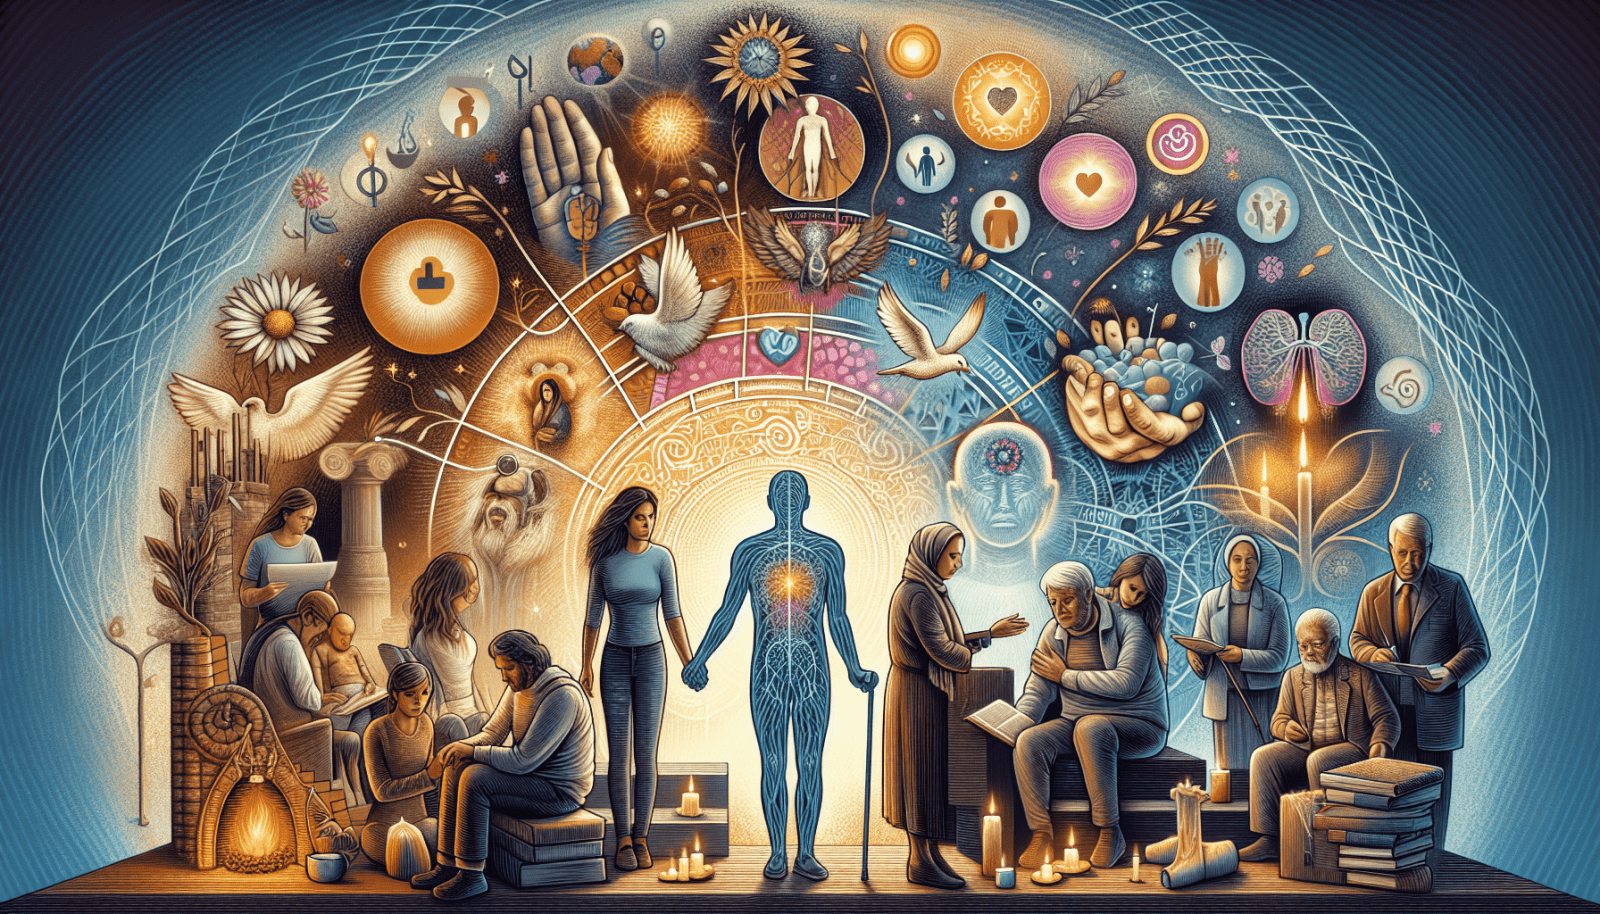 An intricate illustration combining themes of science, spirituality, and human connection, featuring a central human figure surrounded by symbols of various religions and scientific concepts, with vignettes of people engaged in study, contemplation, and caregiving at the periphery, all encompassed within a circular motif suggesting interconnectedness.